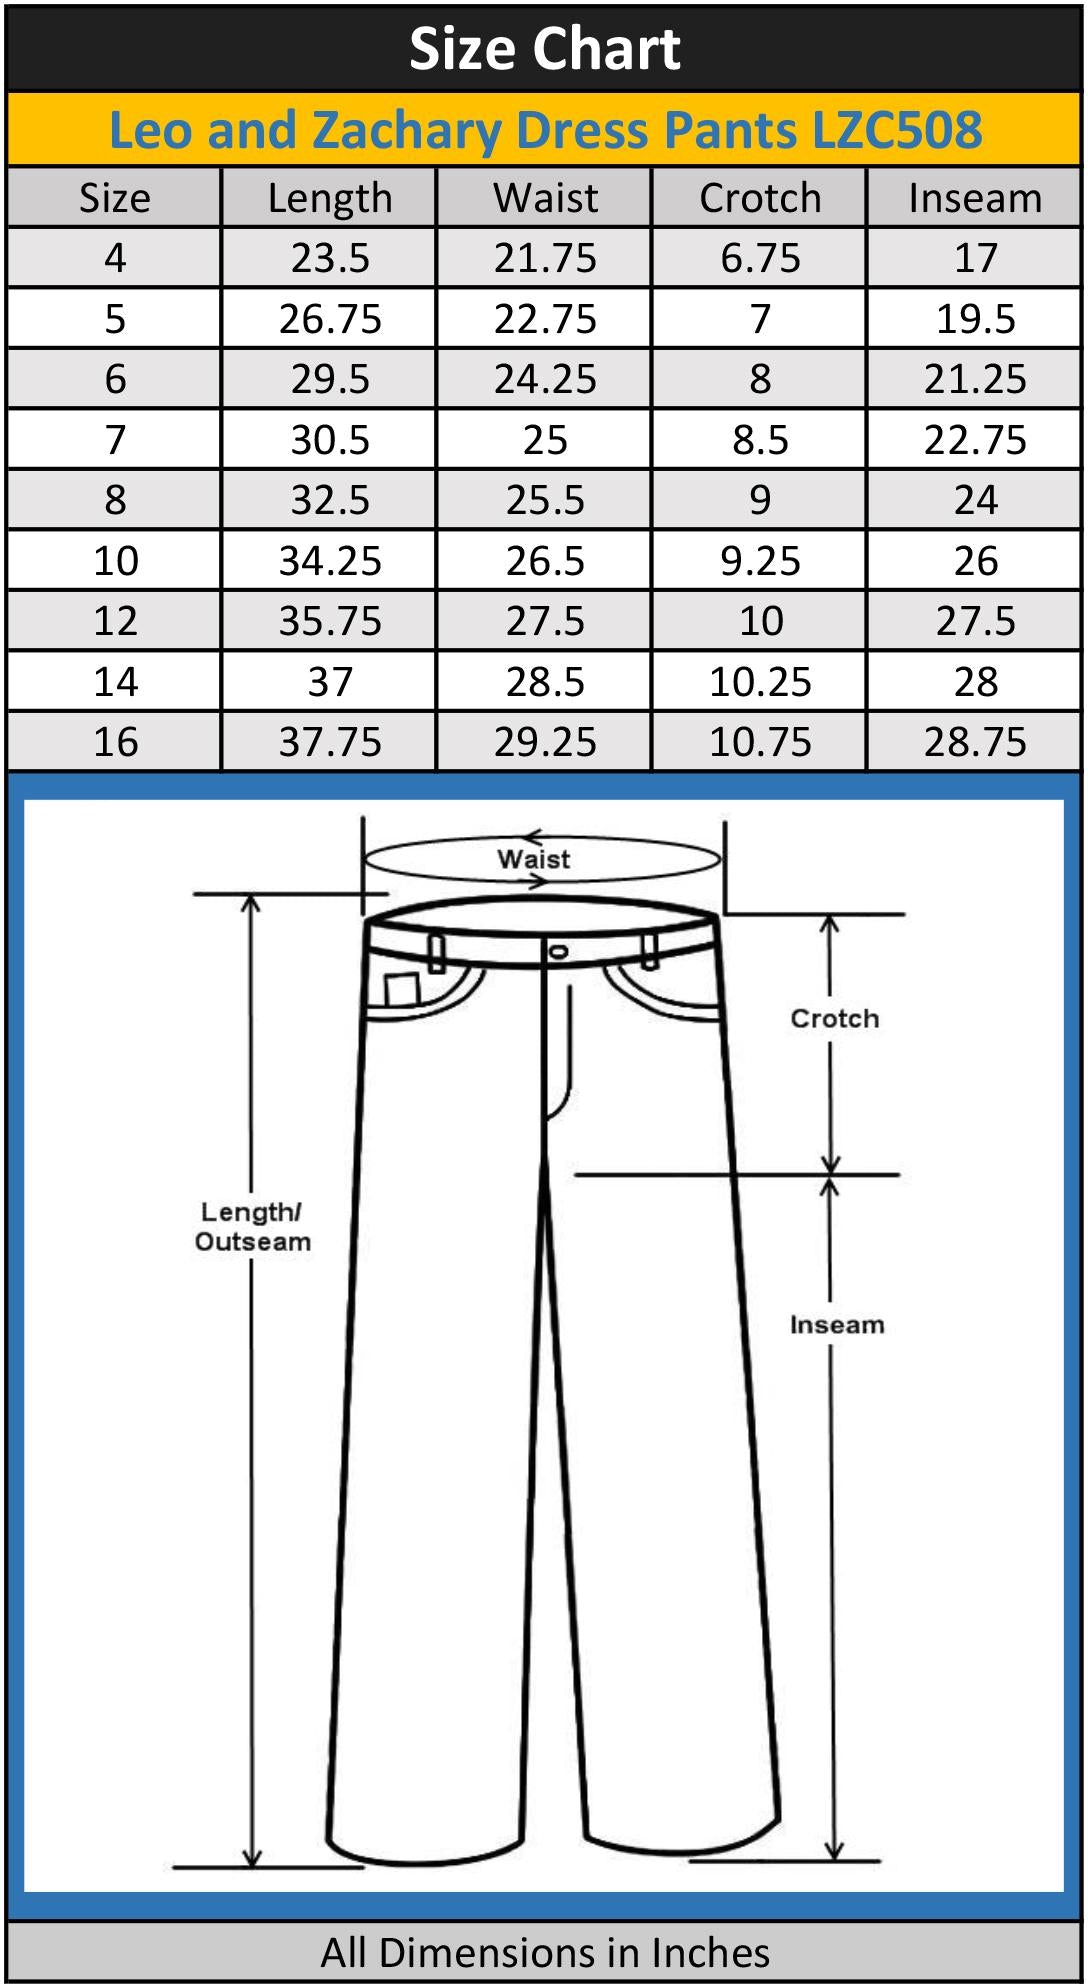 Men's Pants Size Chart - Numerical - The Normal Brand